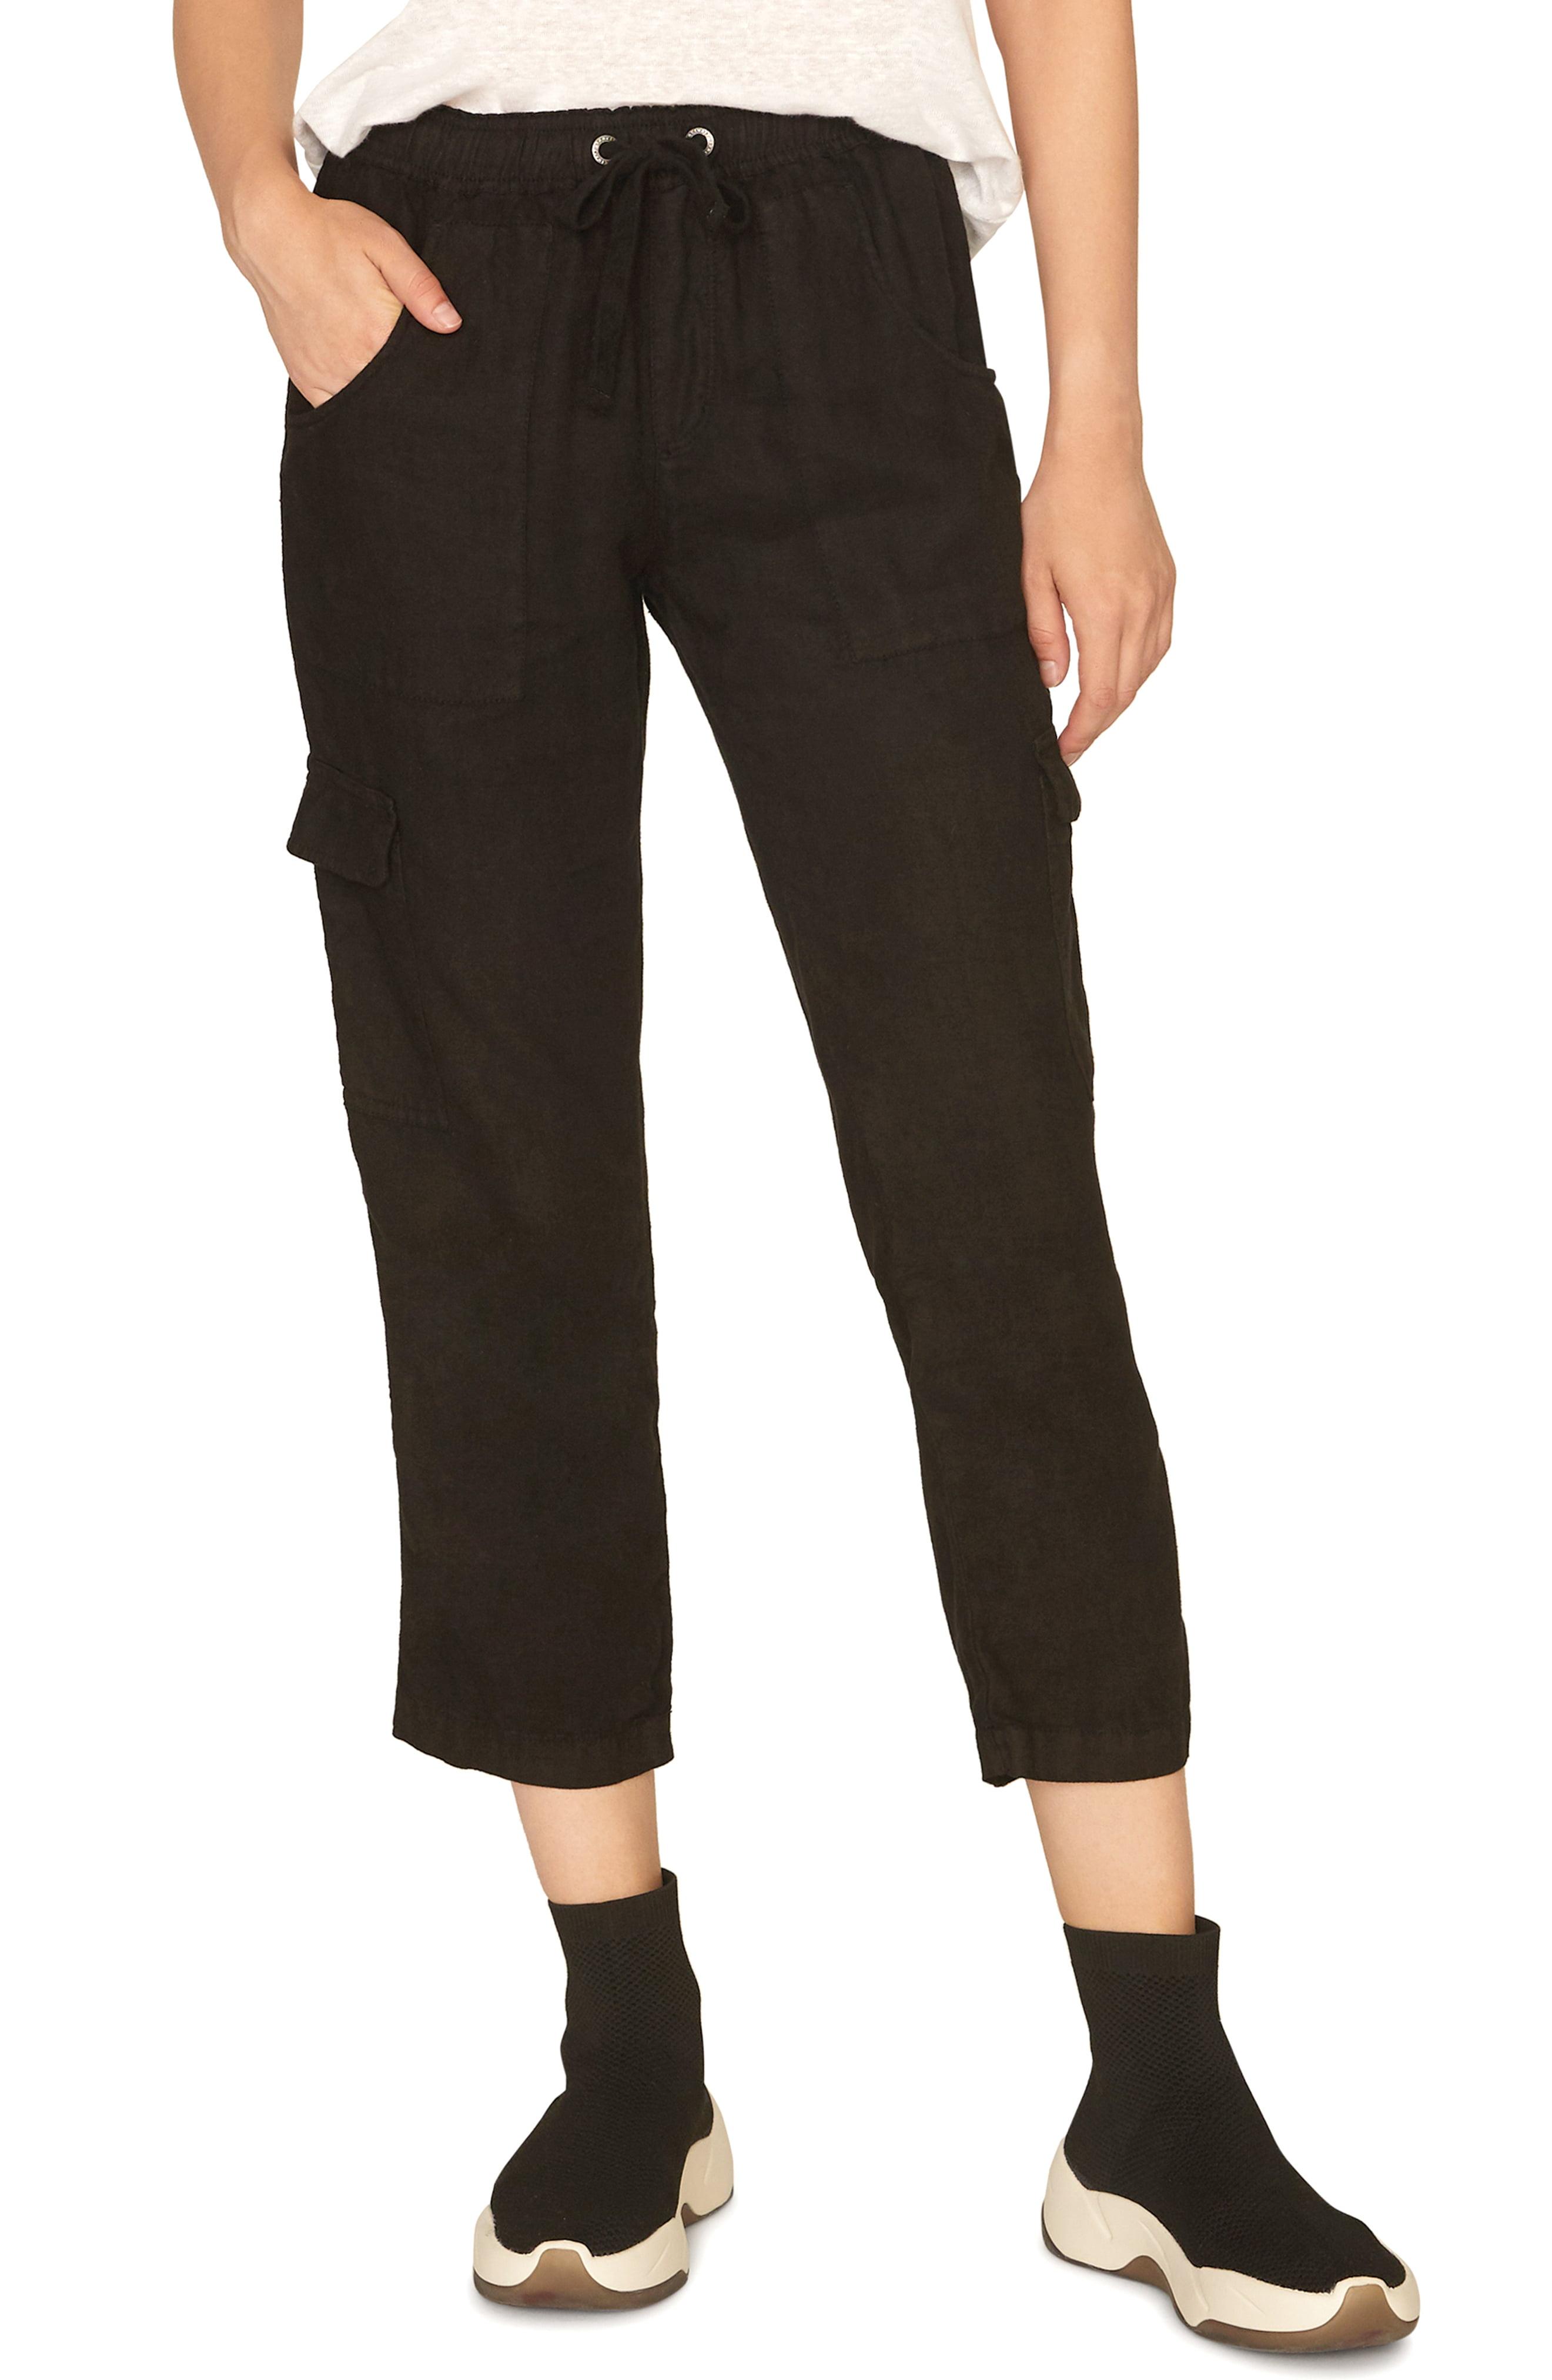 Lyst - Sanctuary Discoverer Pull-on Cargo Pants in Black